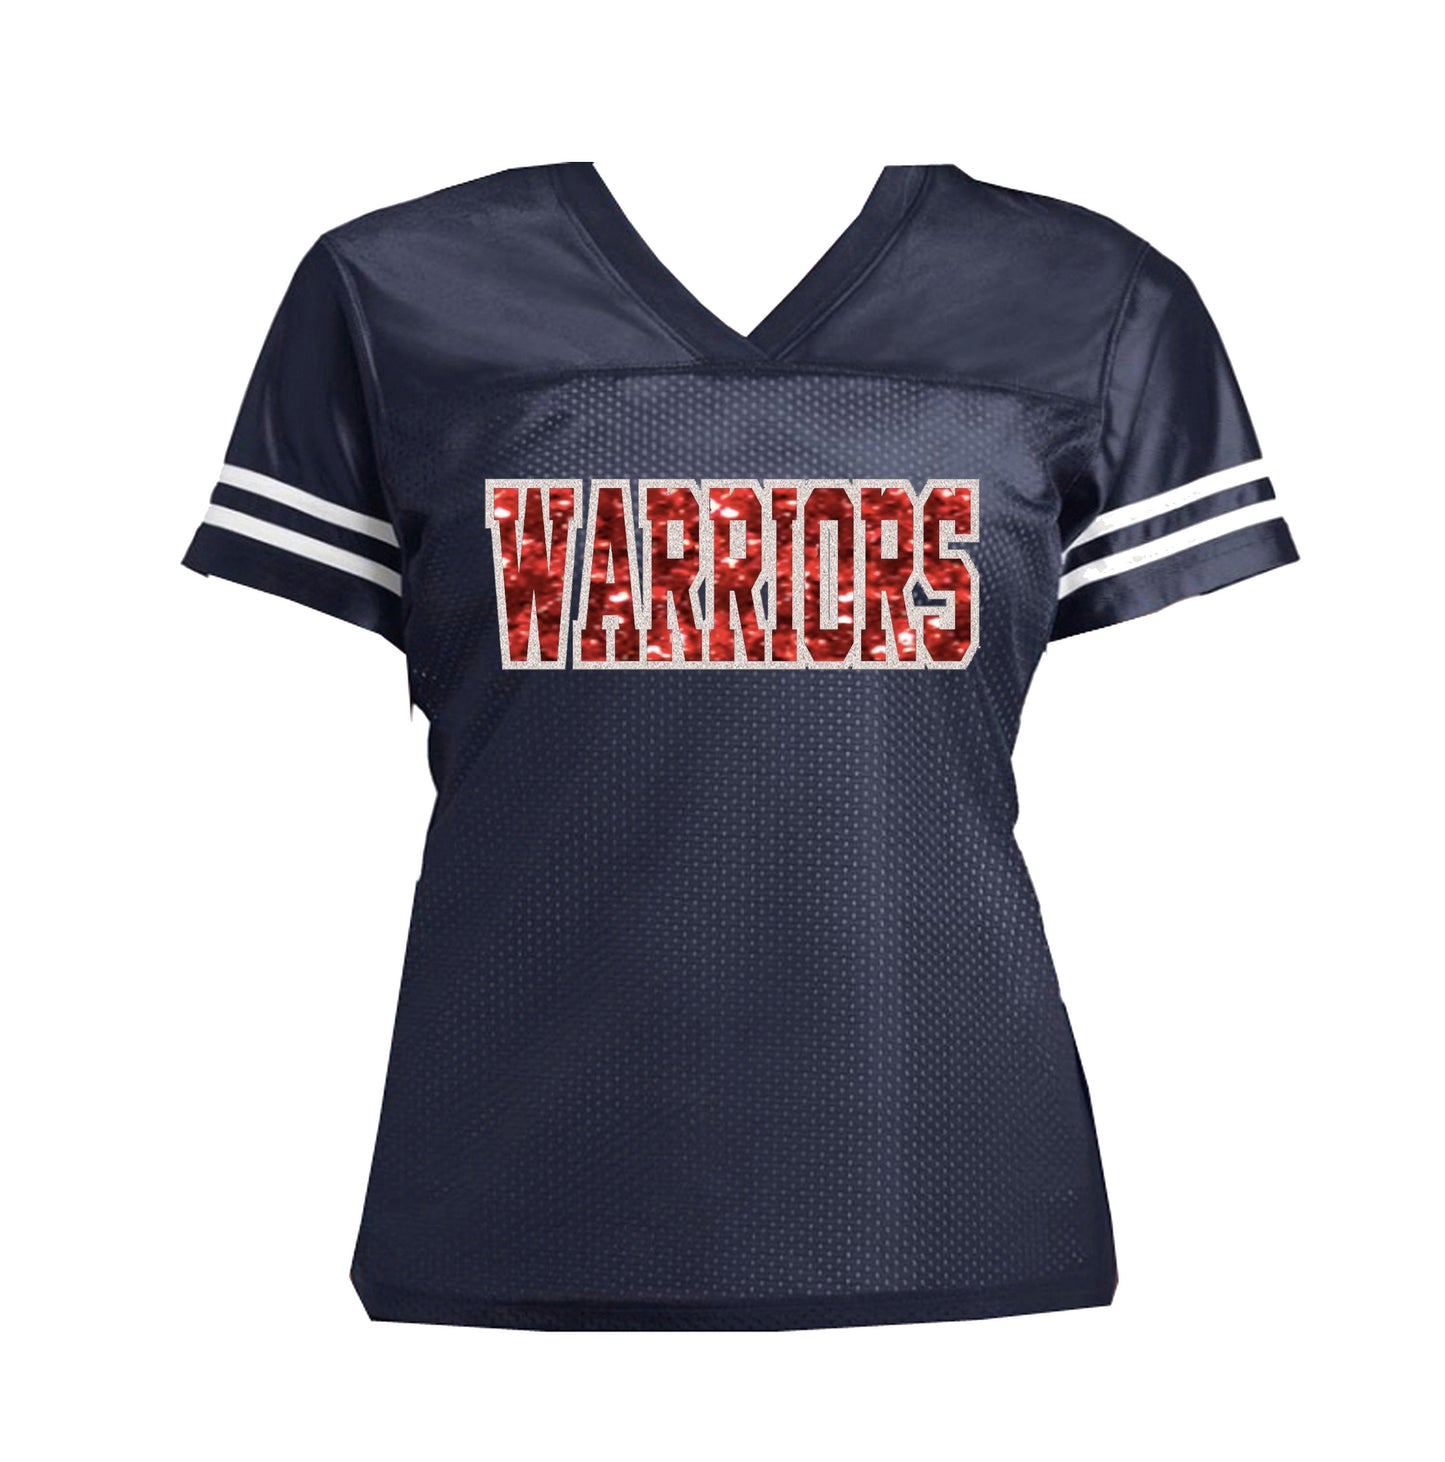 Red Gold Glitter Personalized Football Jersey Shirt for Ladies and Moms